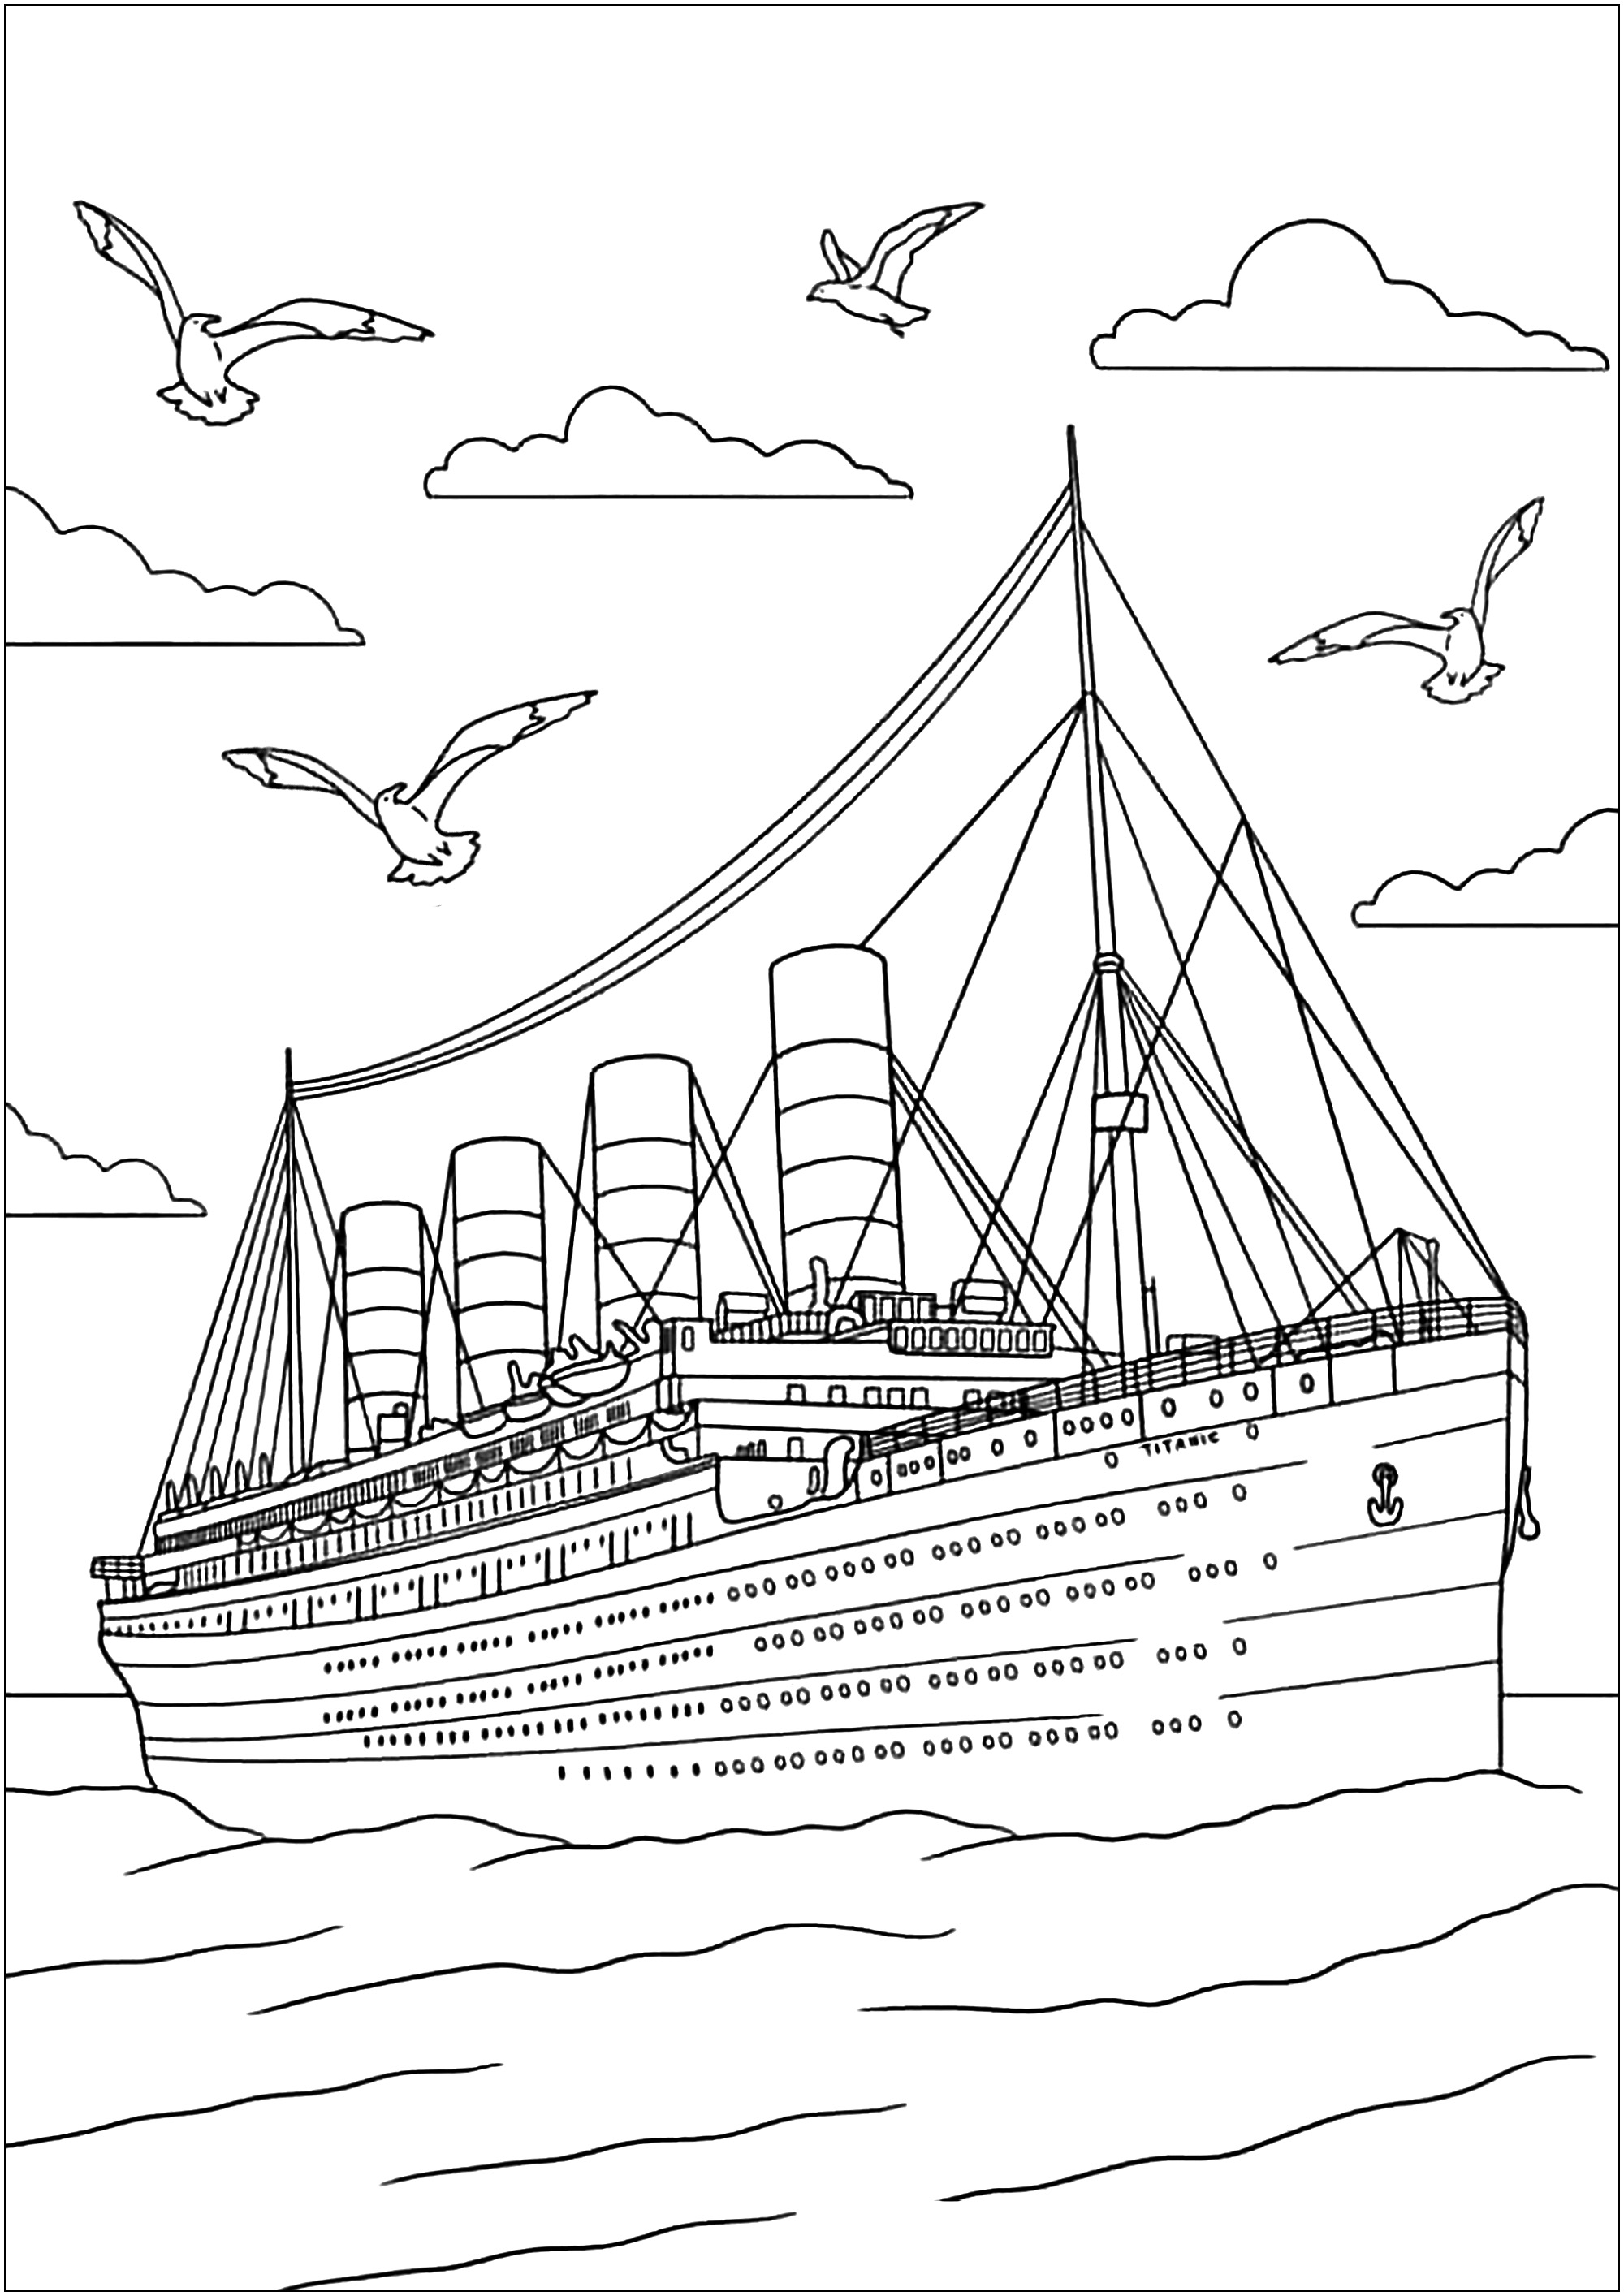 Magnificent, highly detailed drawing of the Titanic - Titanic Kids ...